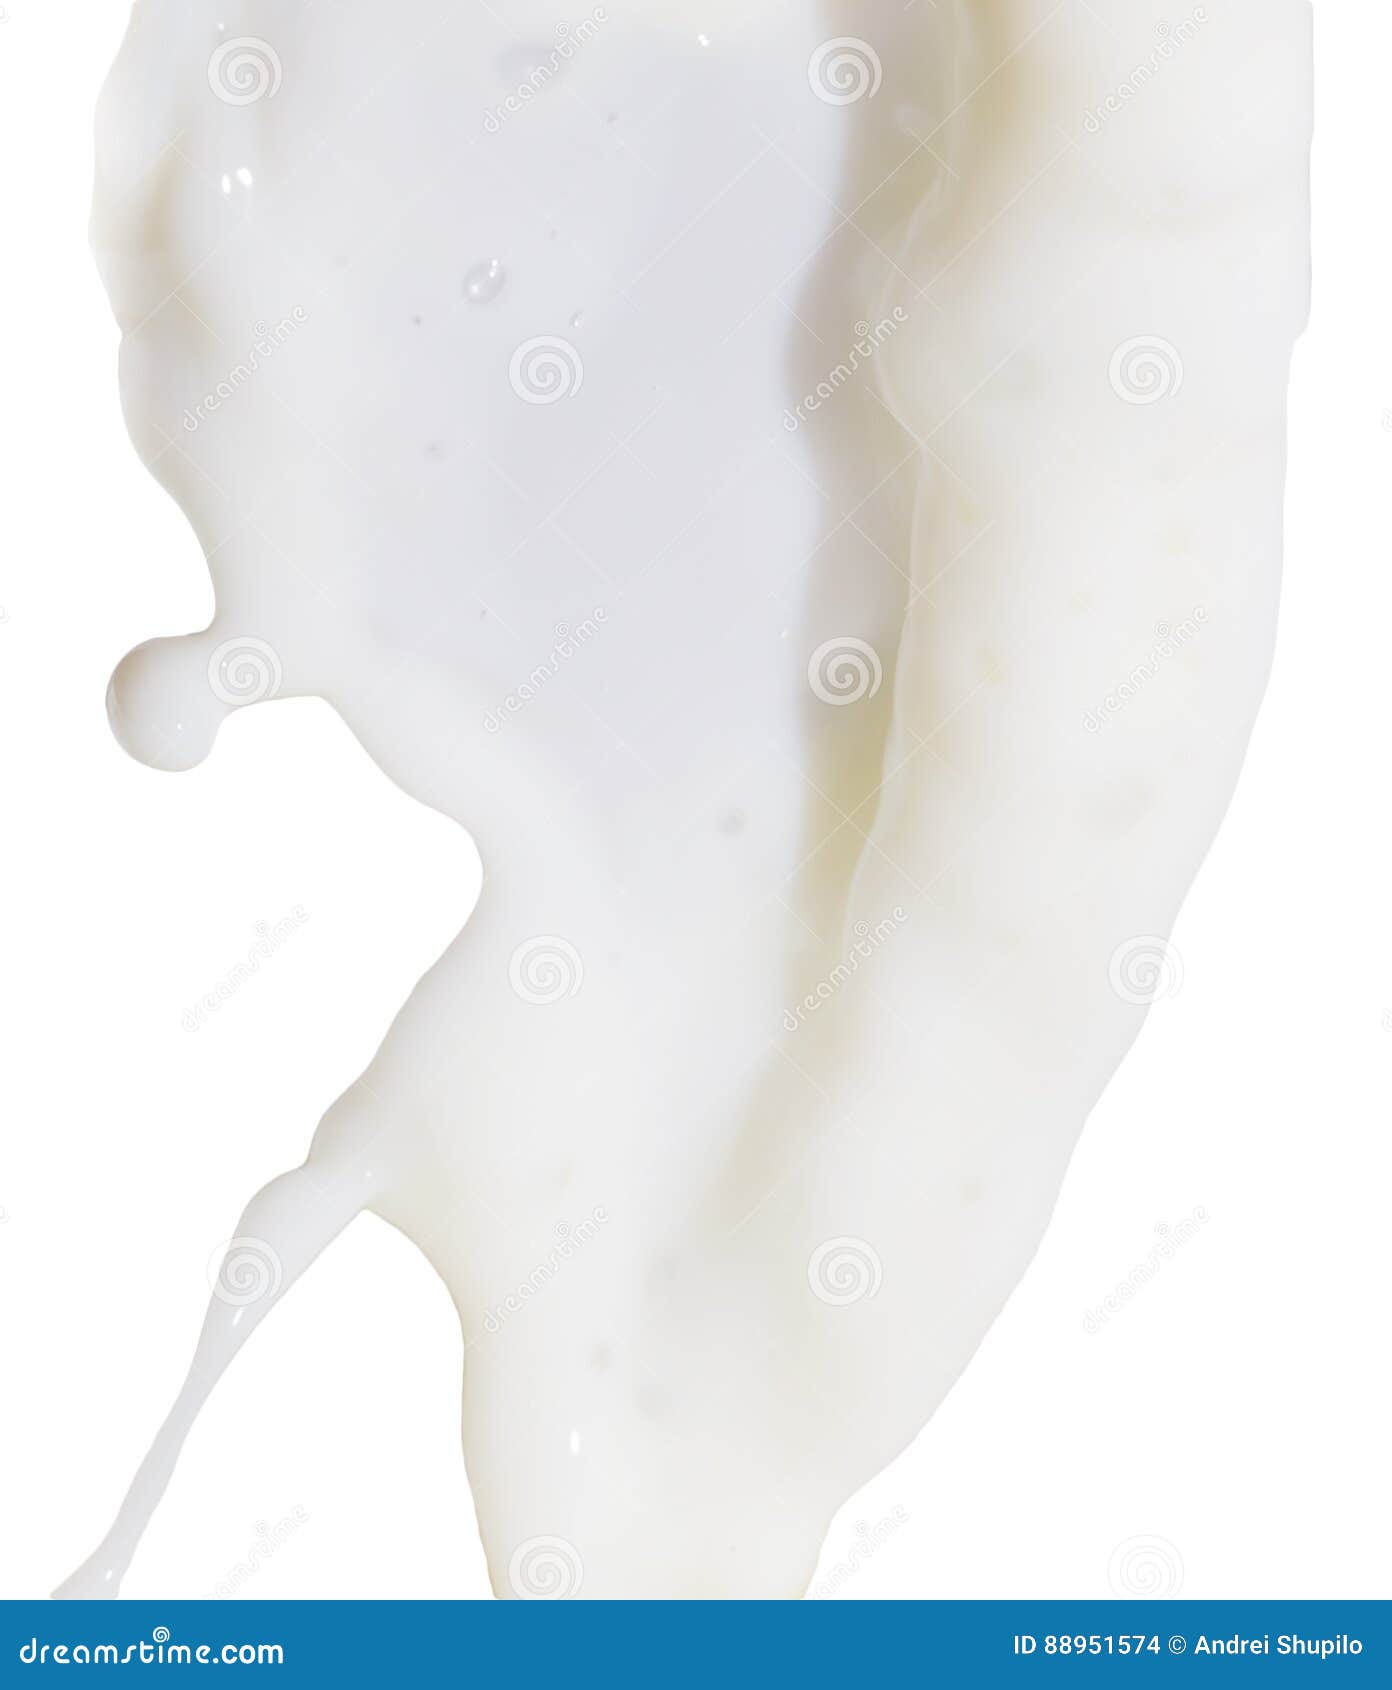 Milk on a white background stock photo. Image of concepts - 88951574